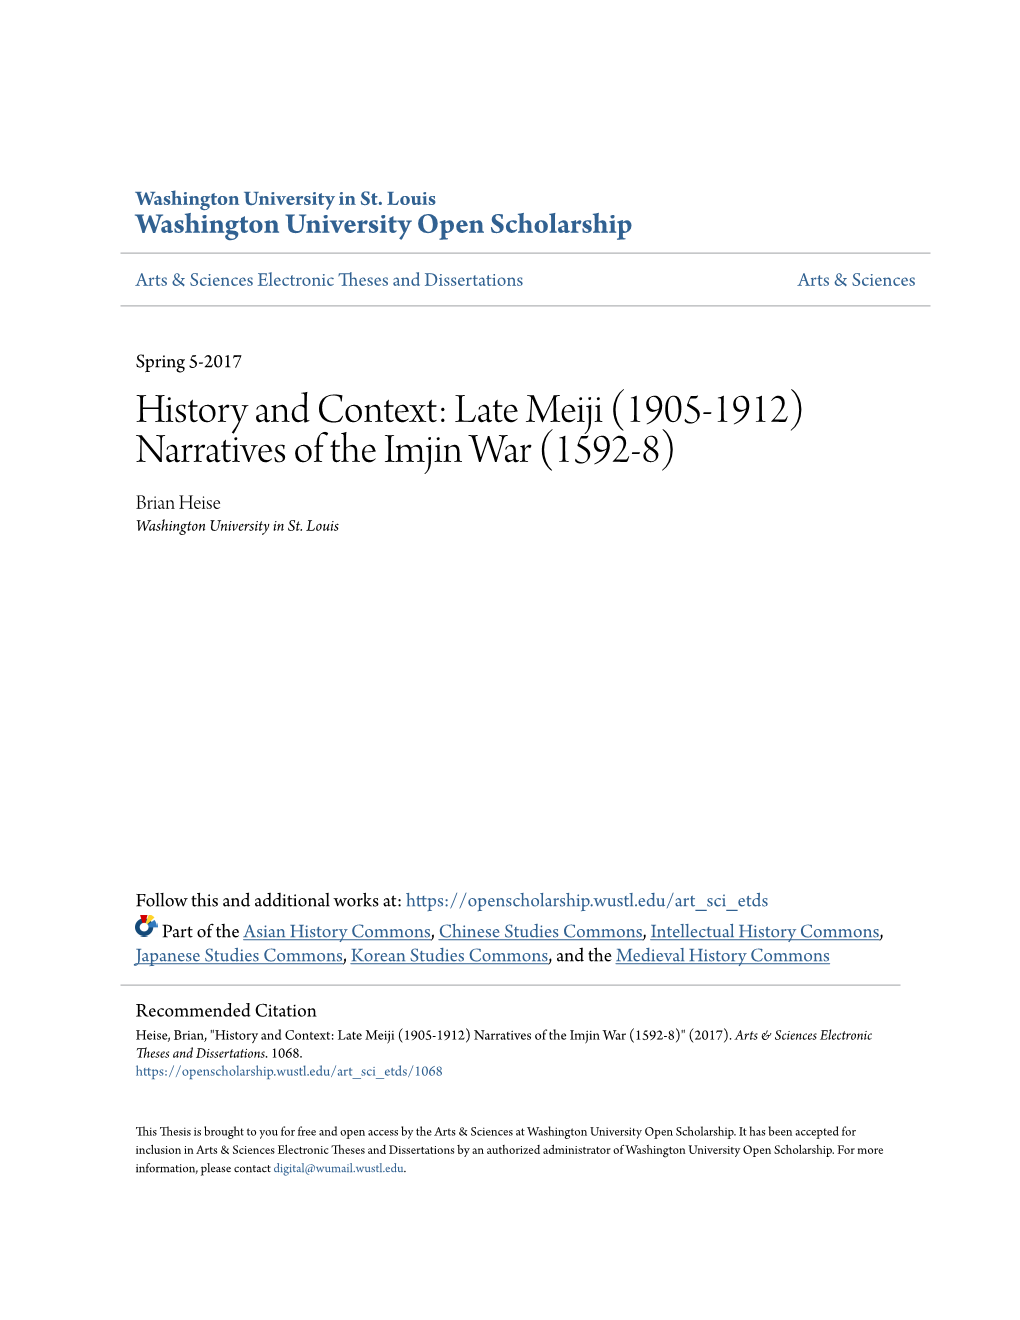 History and Context: Late Meiji (1905-1912) Narratives of the Imjin War (1592-8) Brian Heise Washington University in St